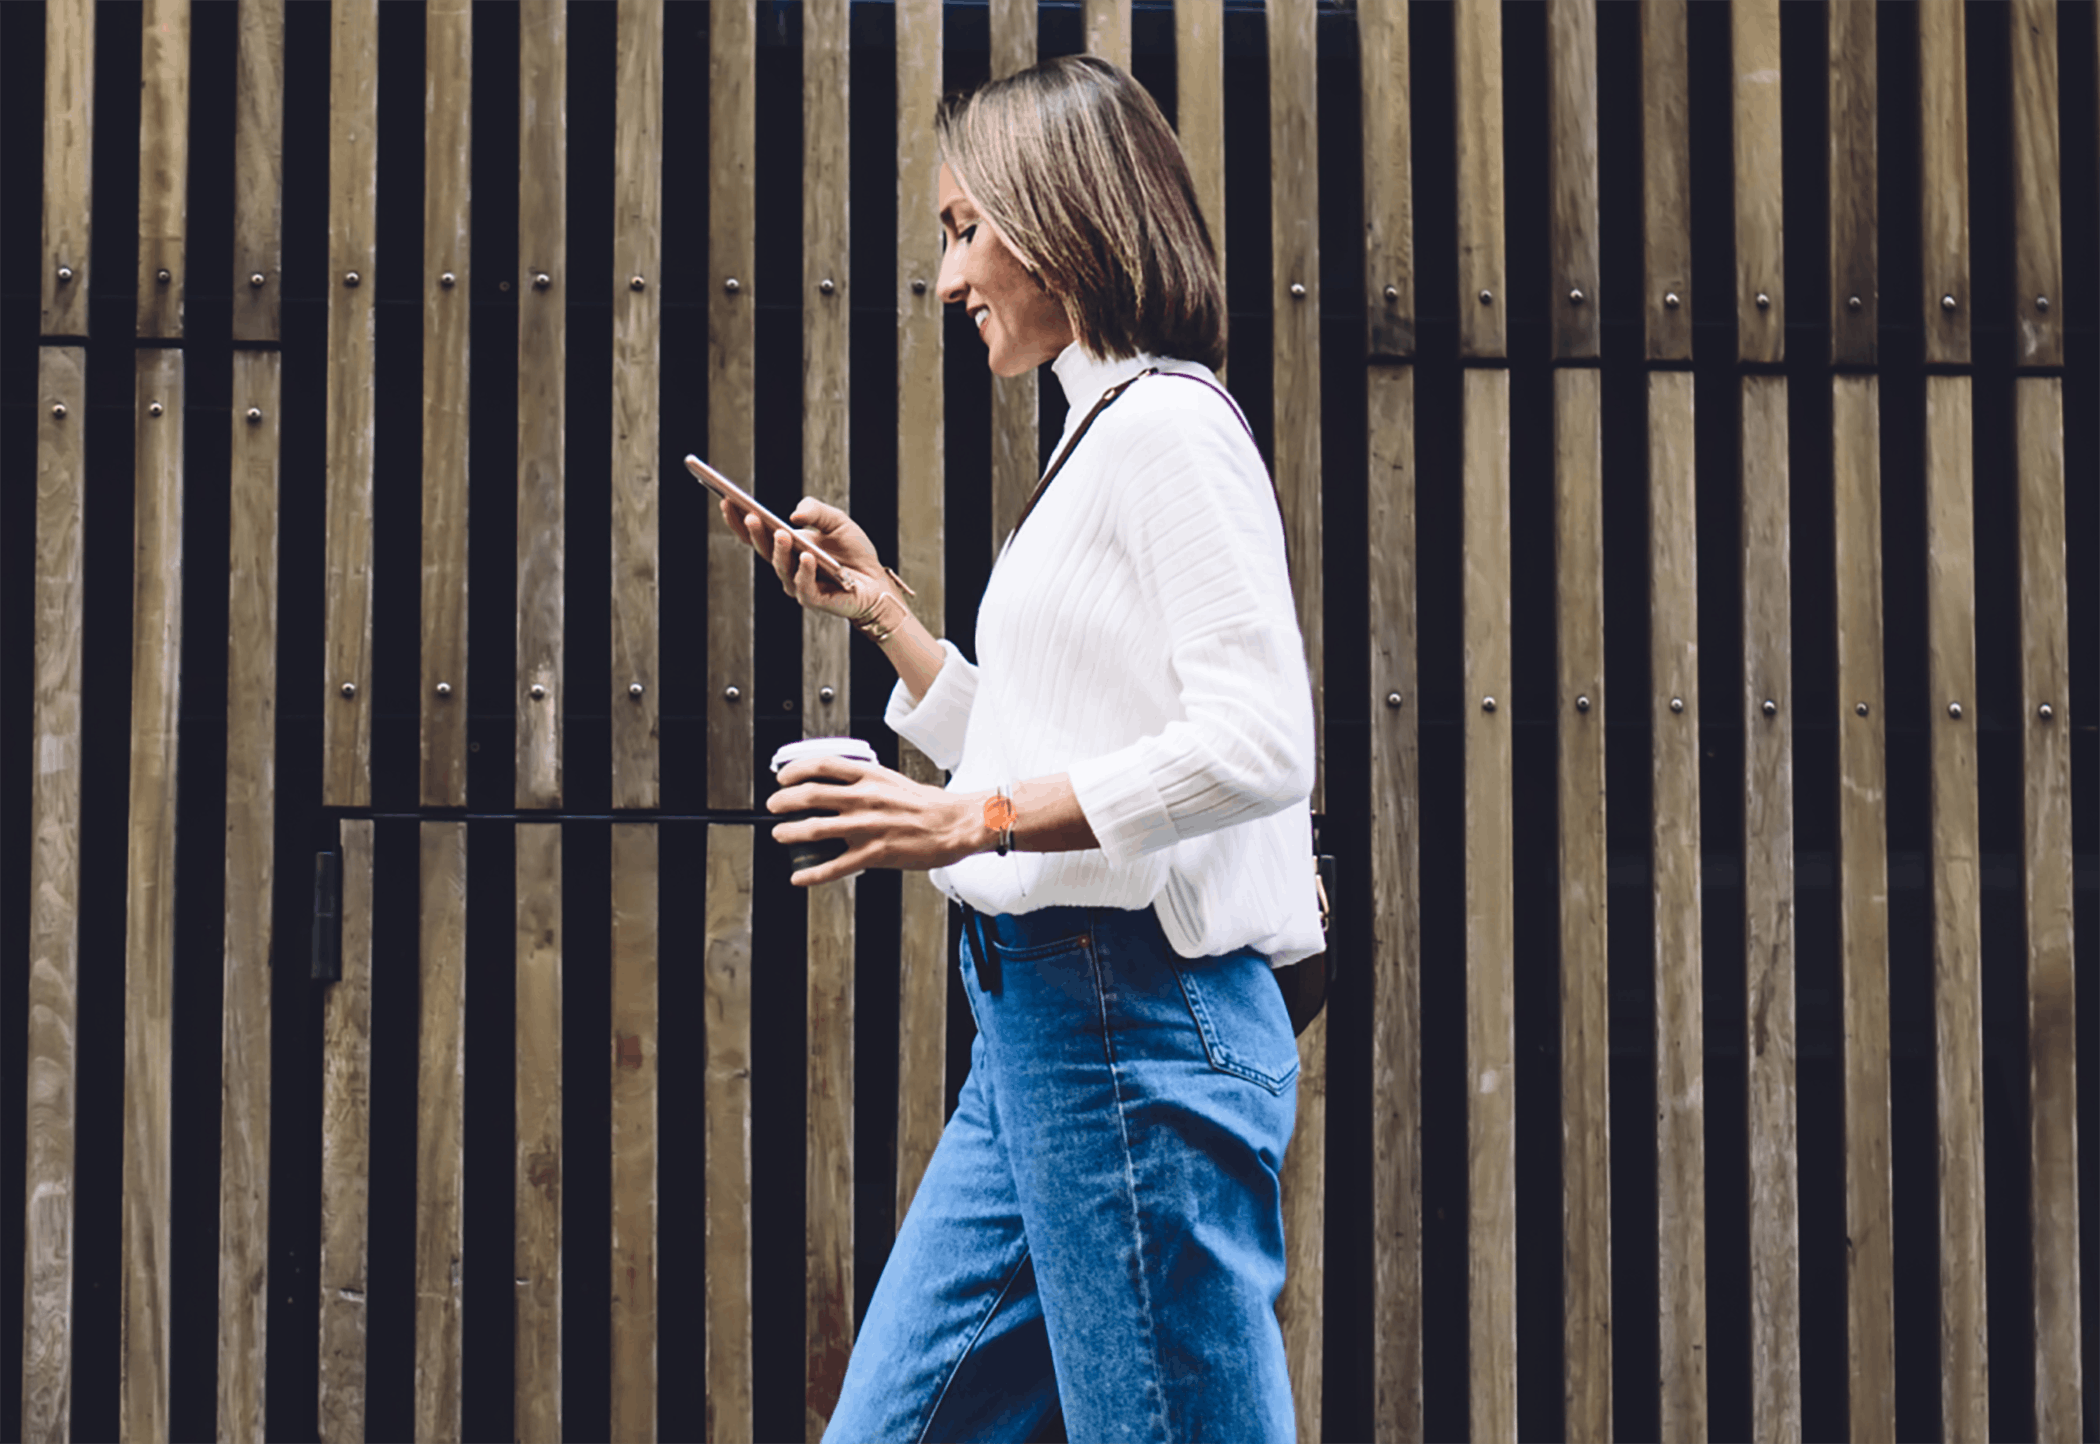 Woman walking and using phone outside